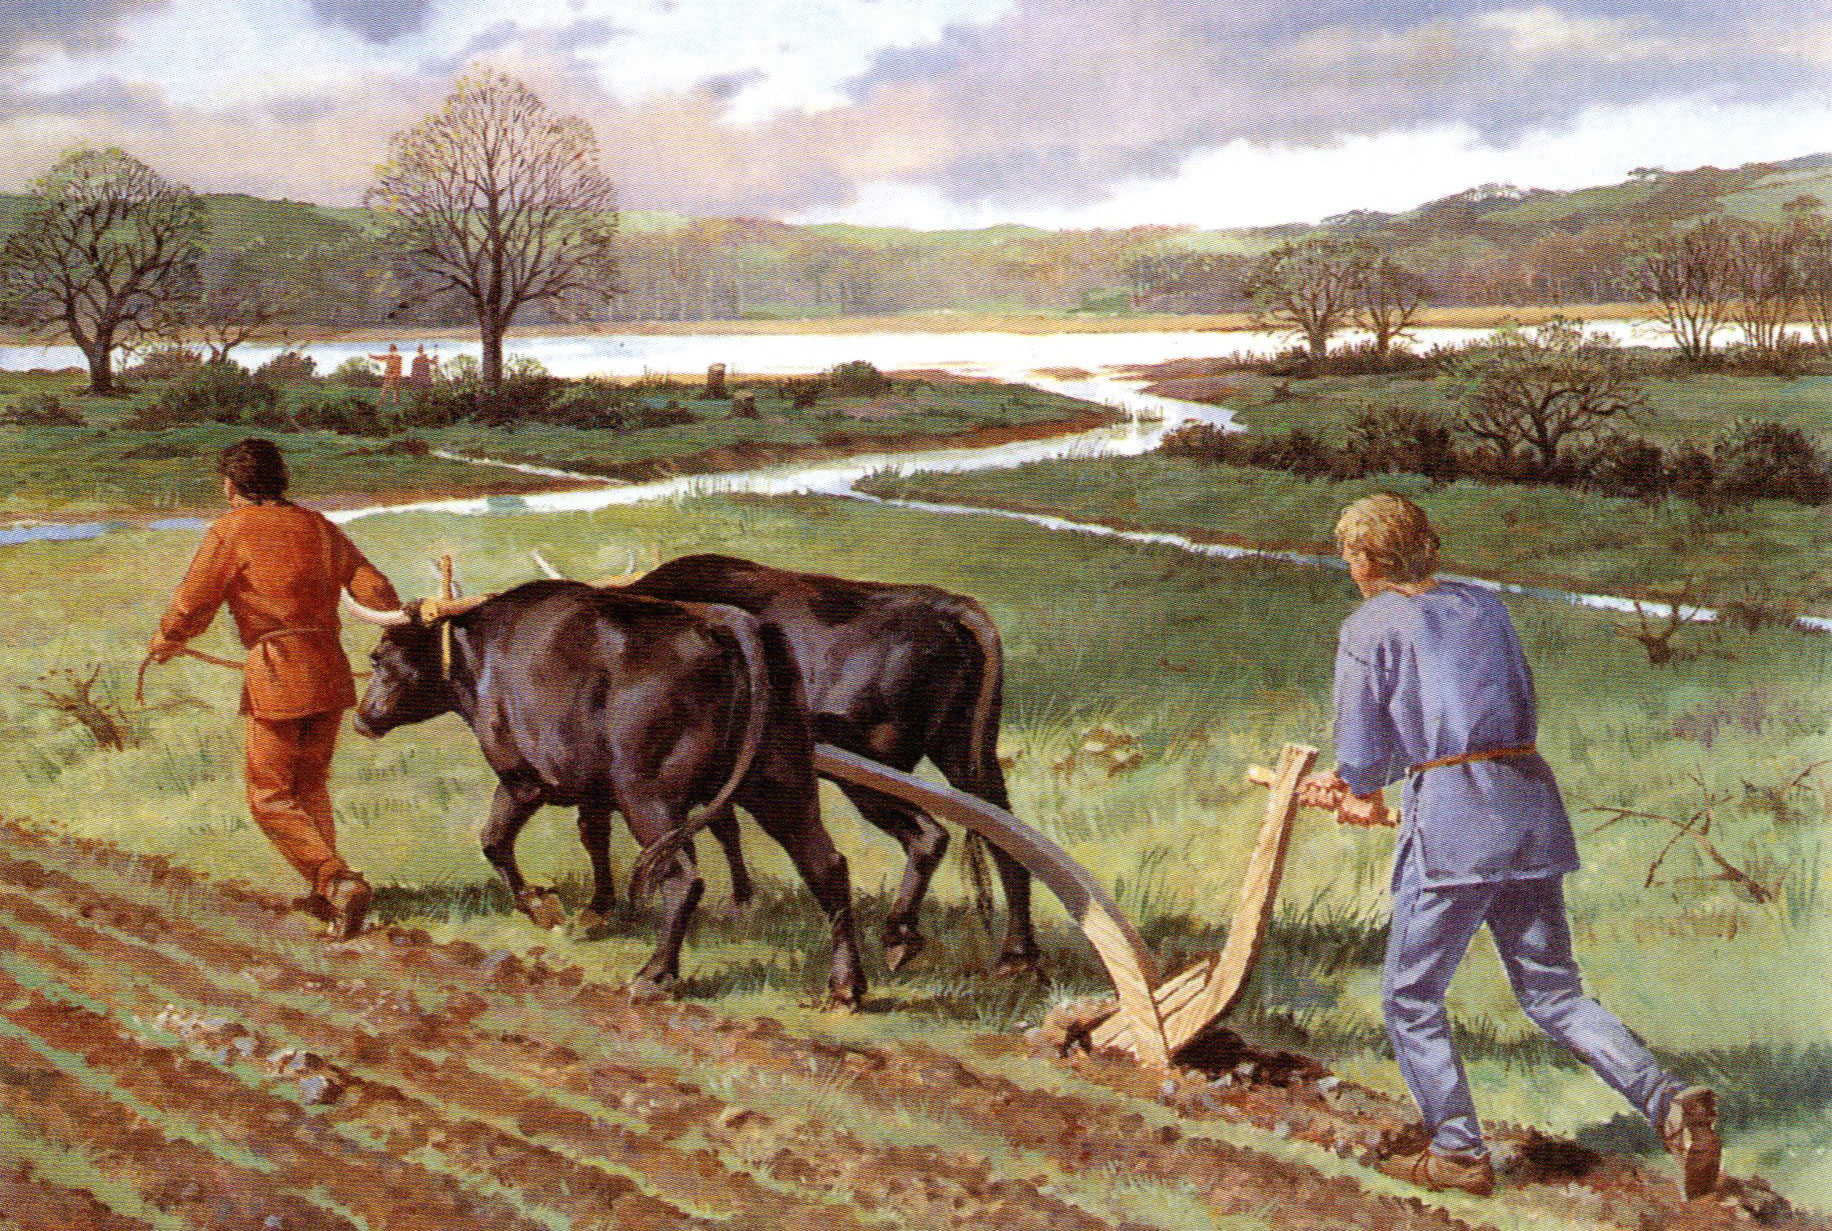 Ploughing in the Bronze Age - artist's impression